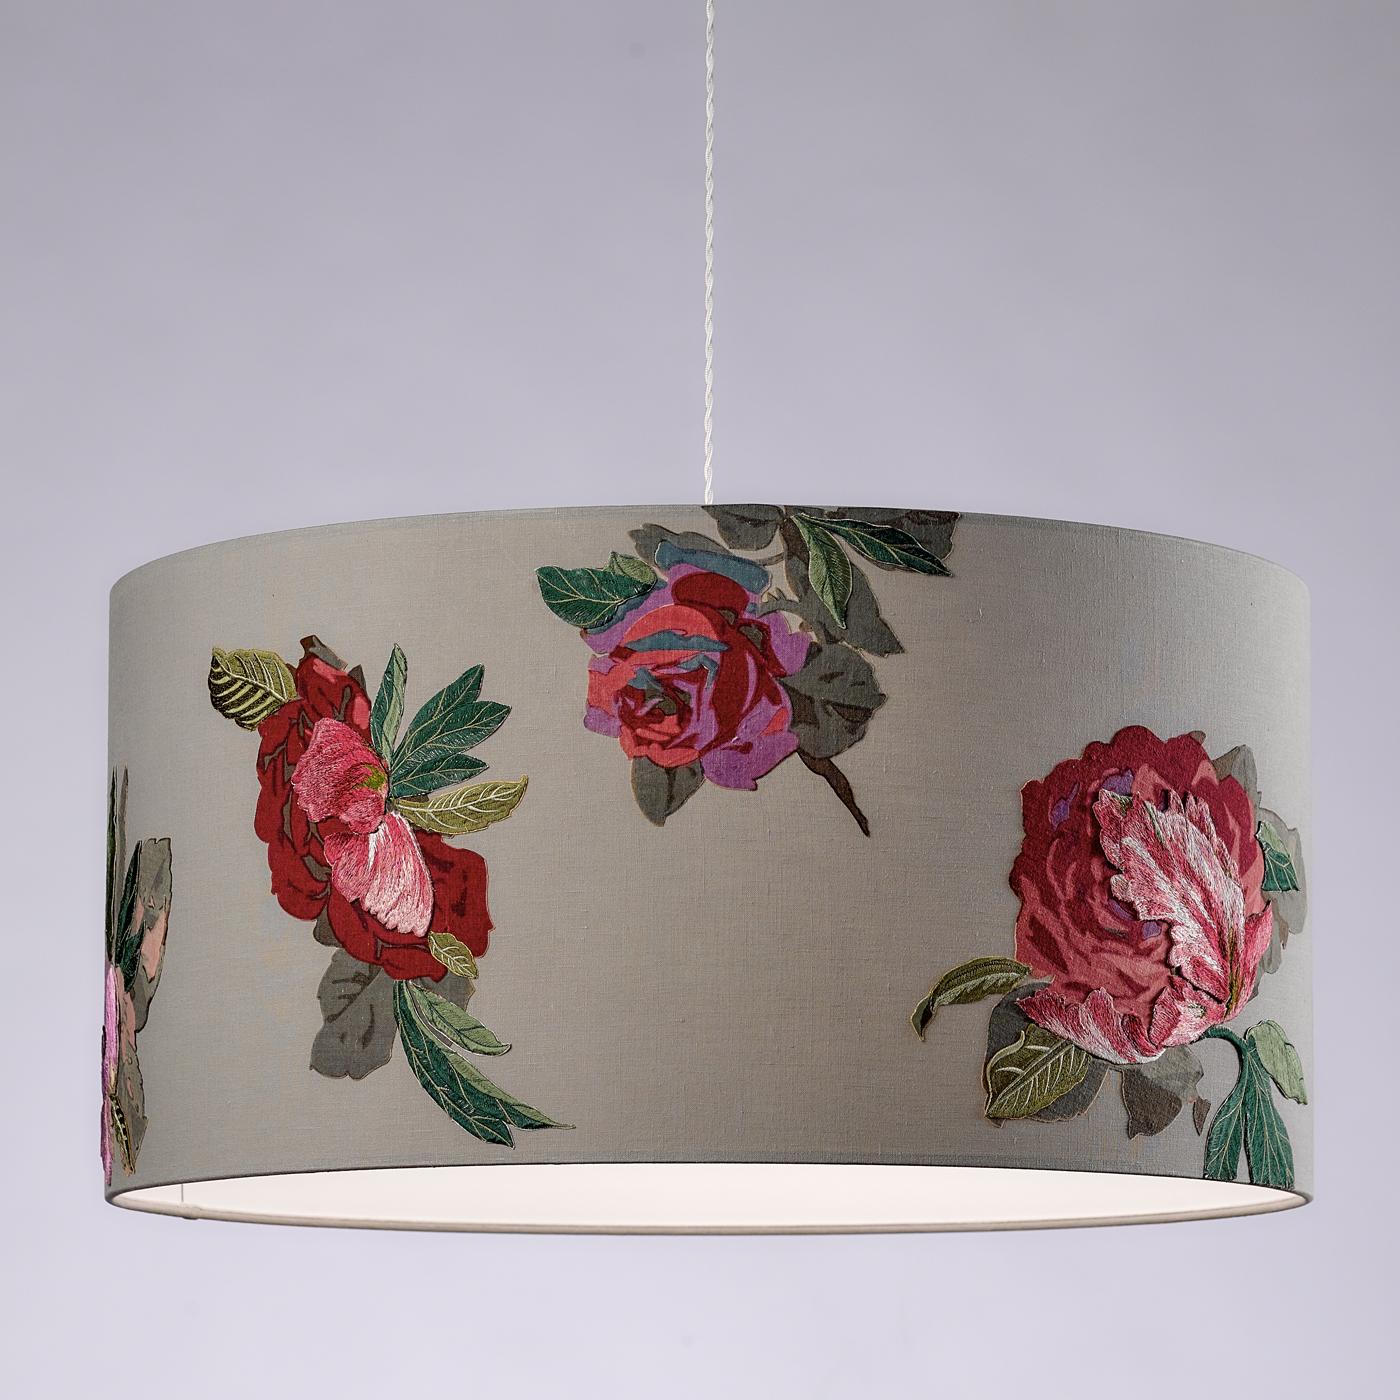 Exquisite hand-embroidered leaves and silk flowers applique' stand out elegantly on the silver gray lampshade of this vintage-inspired pendant lamp. The drum-shaped shade is made of pure linen, a sophisticated color to enhance the exquisite floral